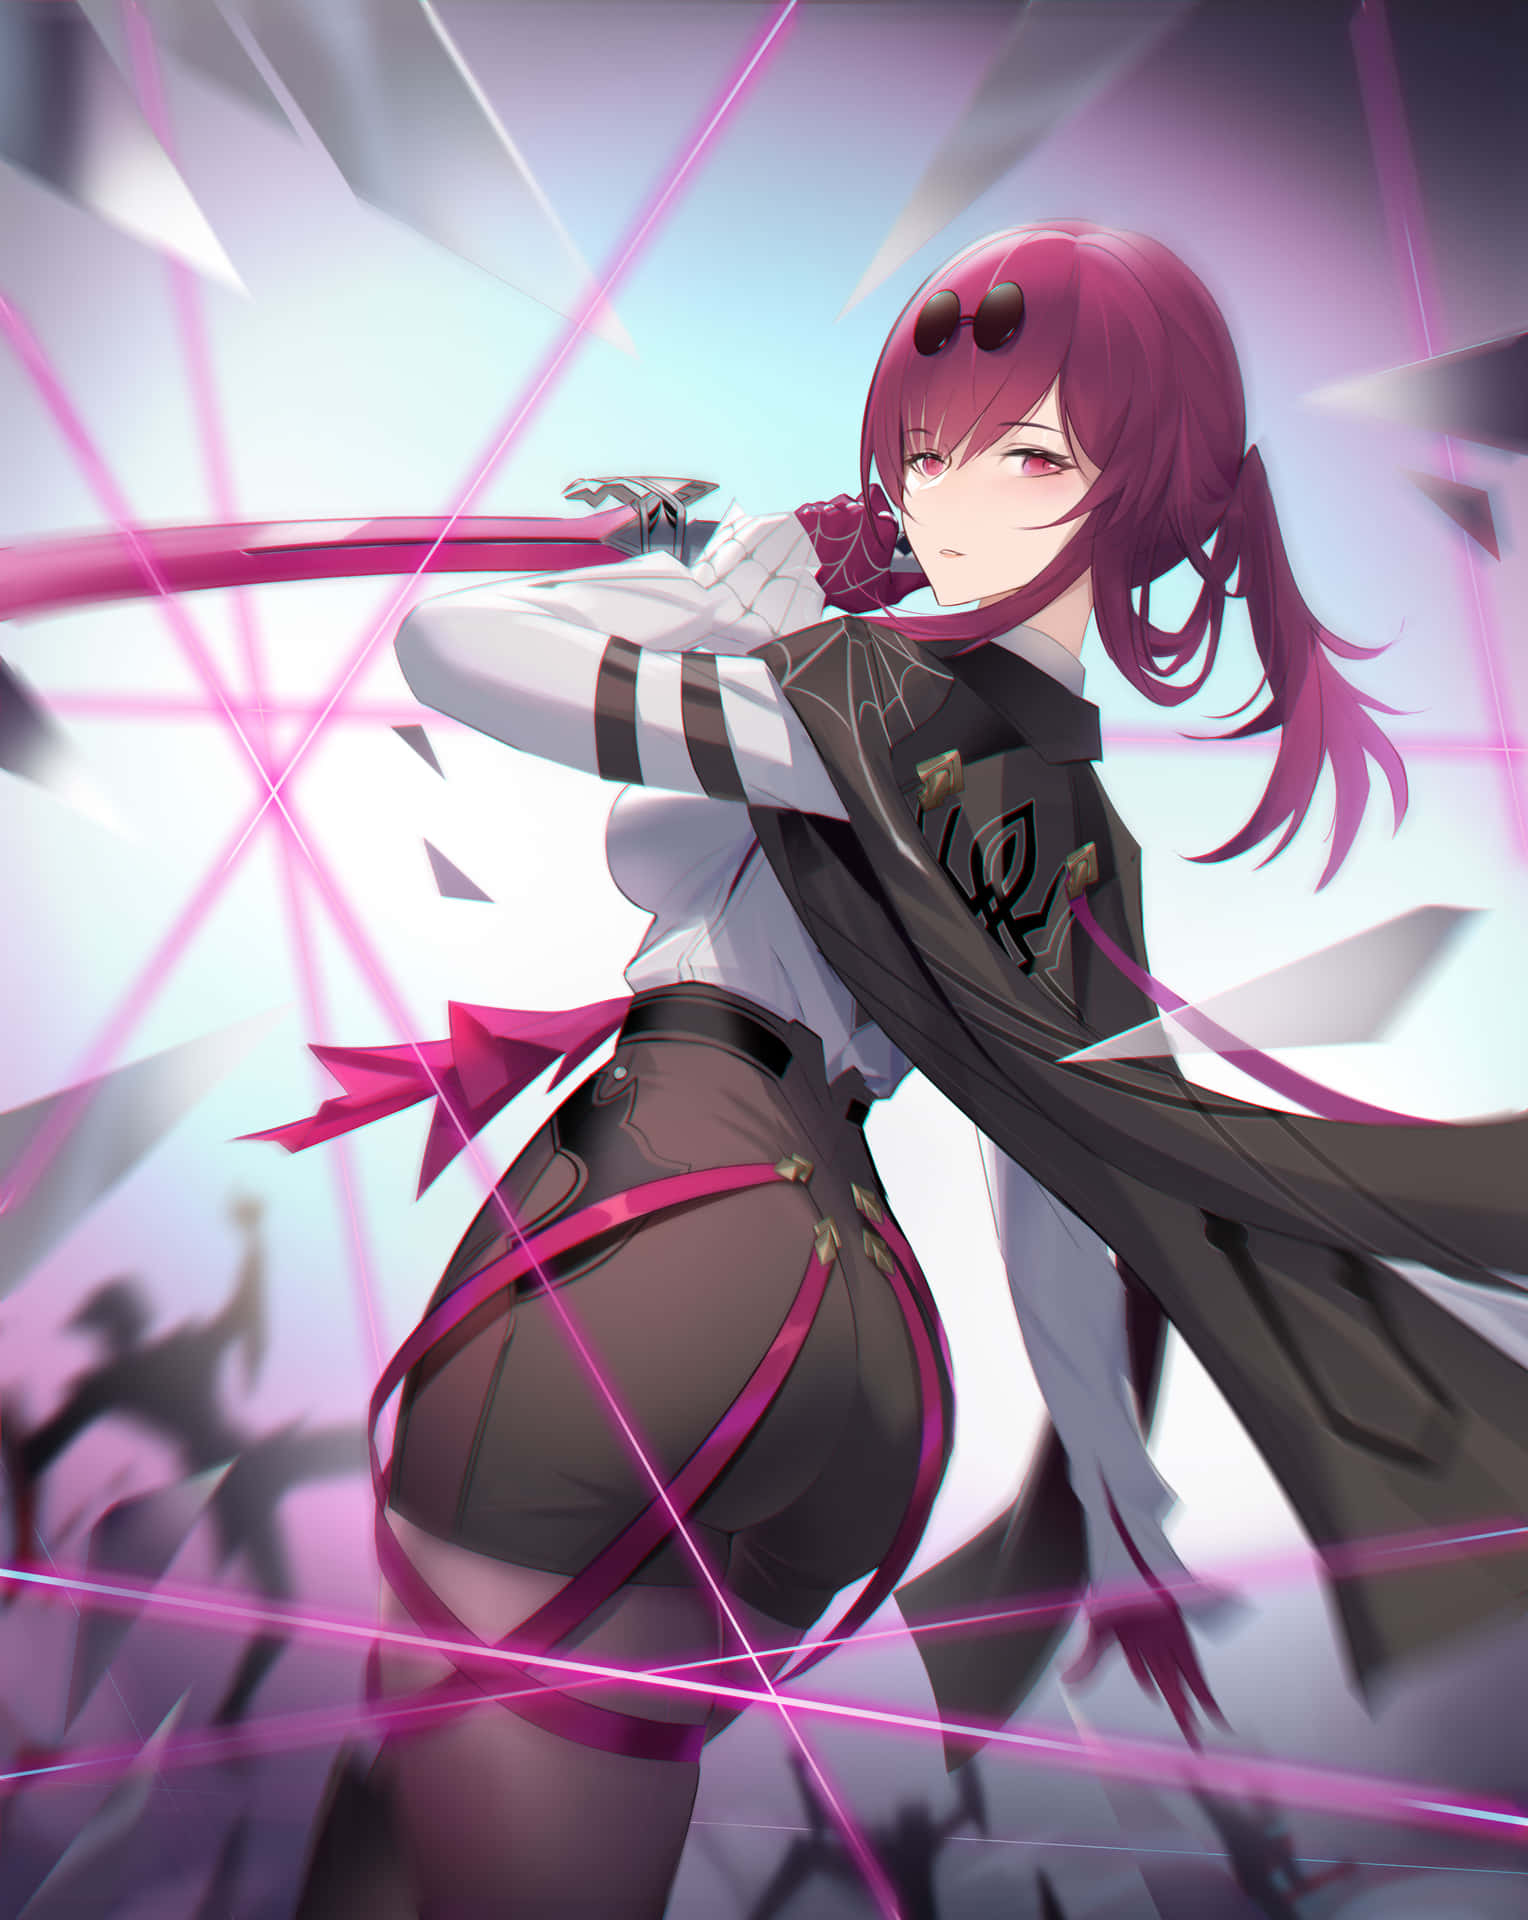 Anime Girlwith Swordand Pink Laser Effects Wallpaper